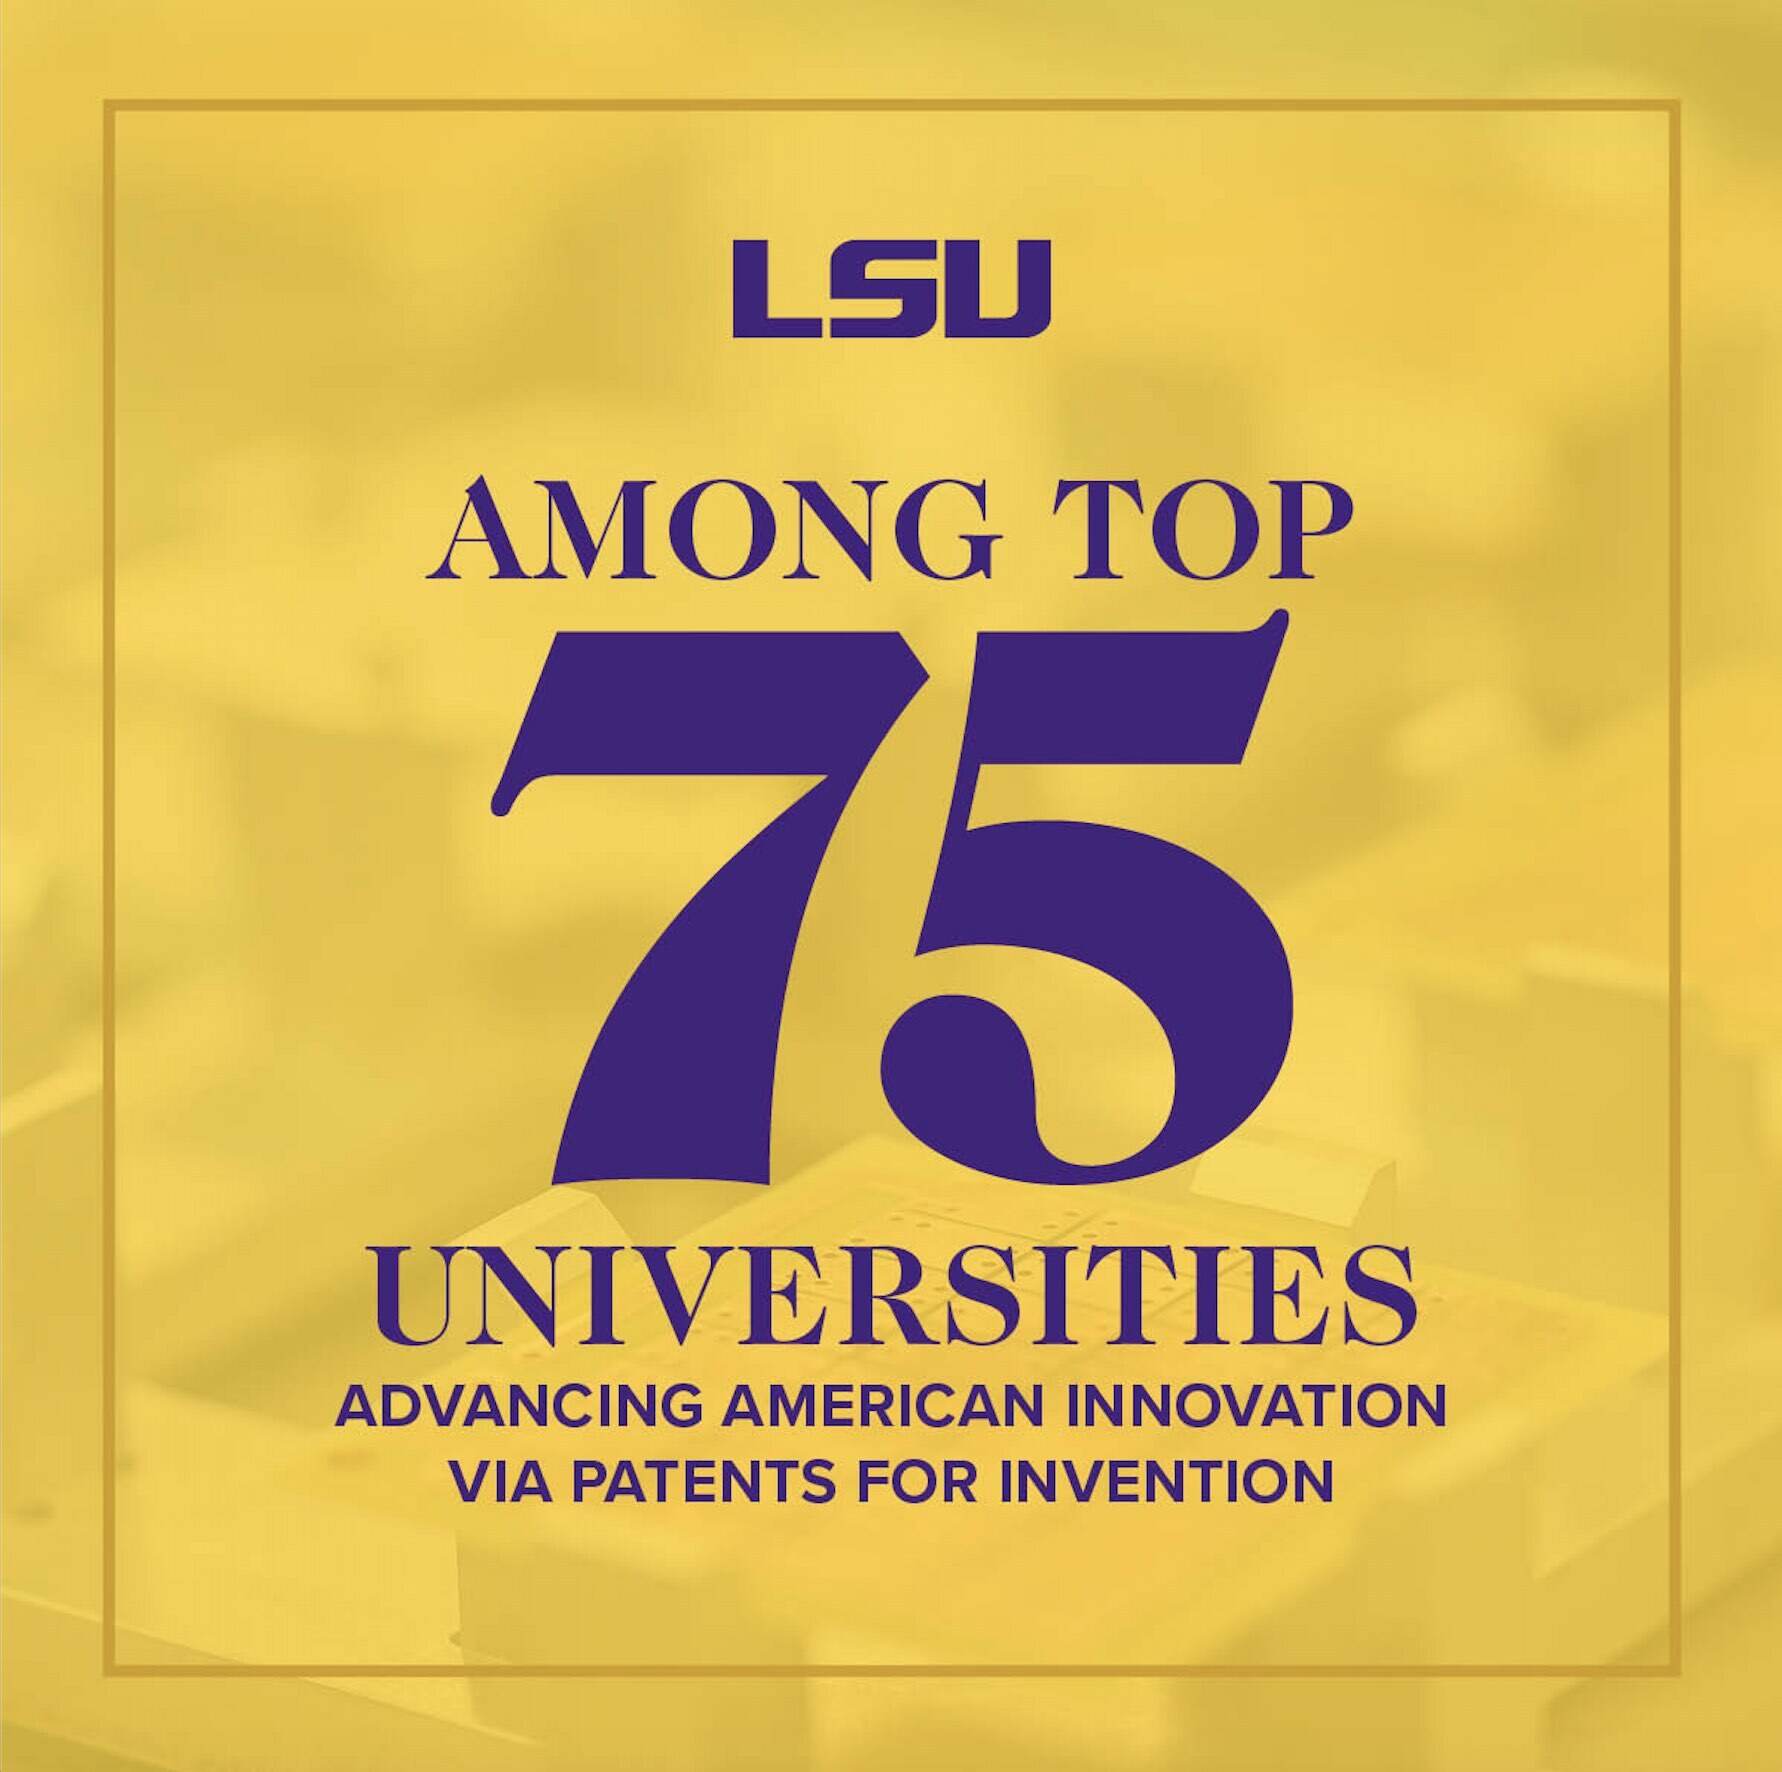 LSU Ranks Among Top 75 Universities in the Nation Granted U.S. Utility Patents